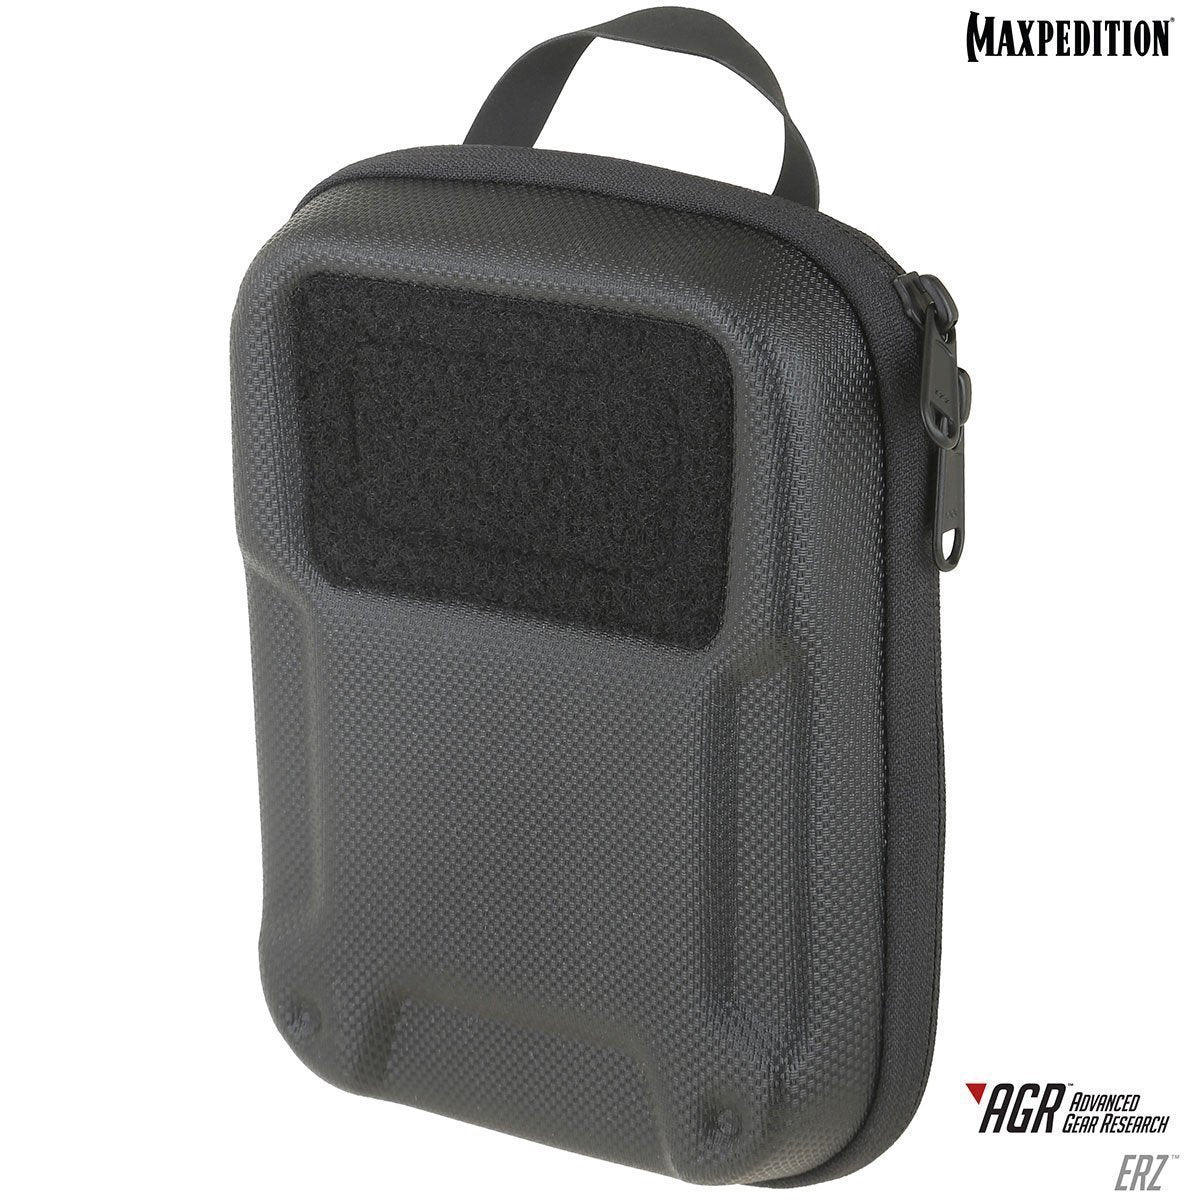 ERZ™ Everyday Organizer | Maxpedition  Tactical Gear